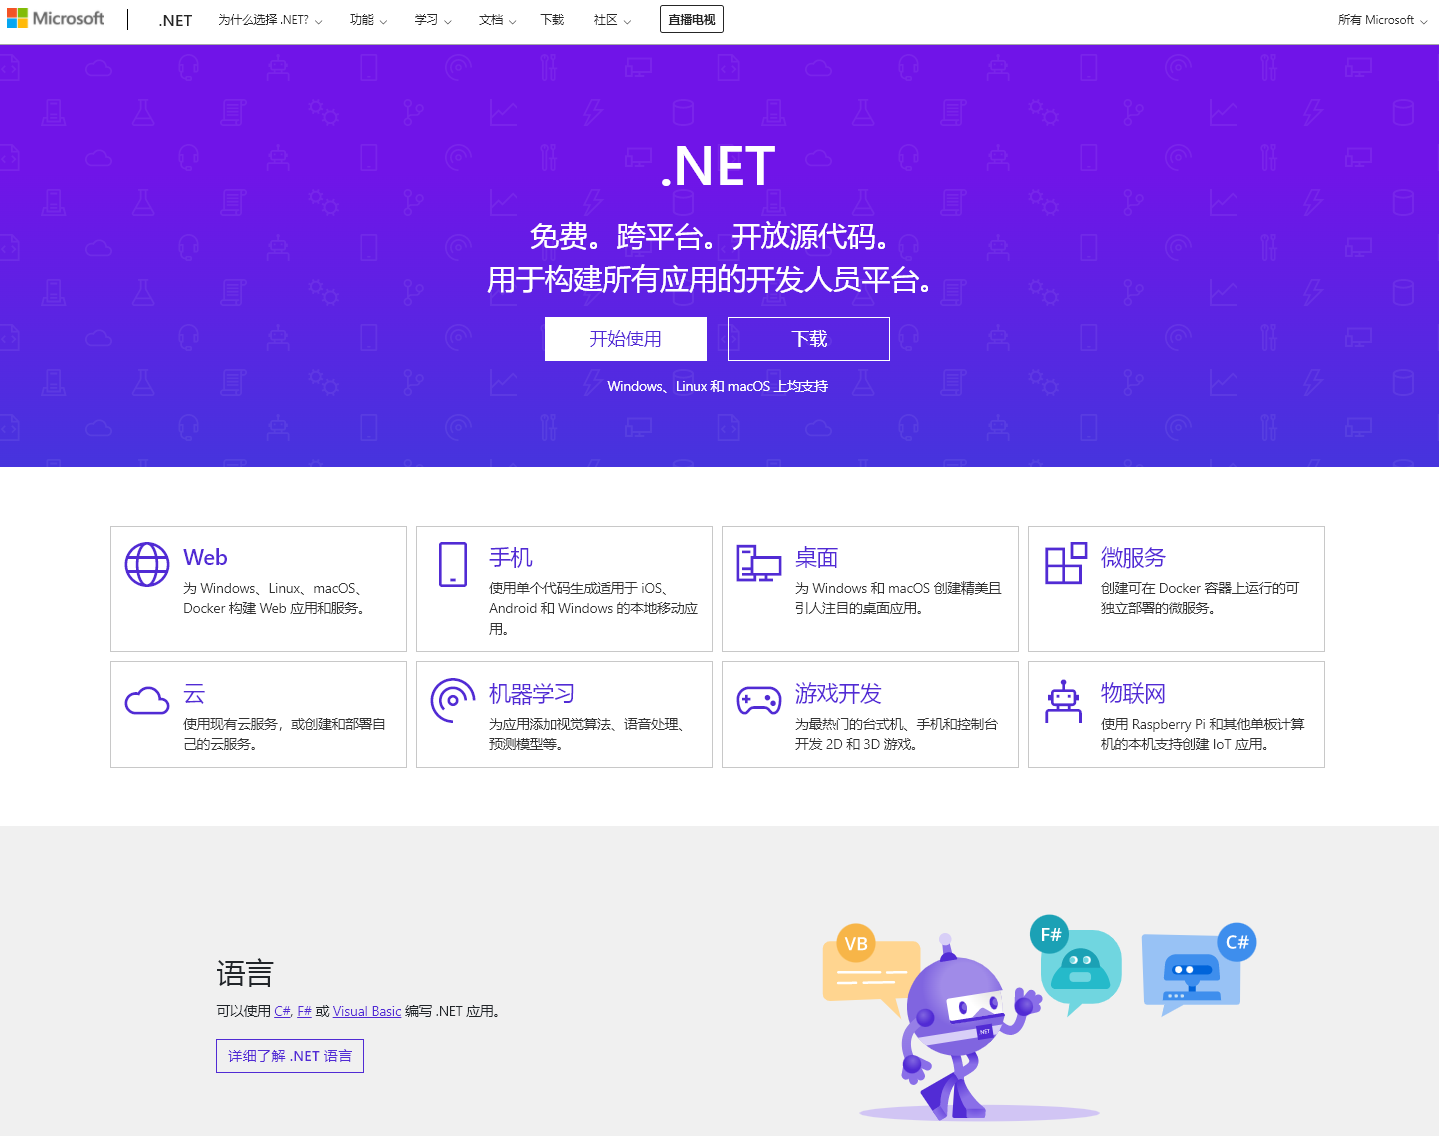 Homepage of the site in Simplified Chinese, Announcing dot.net in Japanese and Simplified Chinese